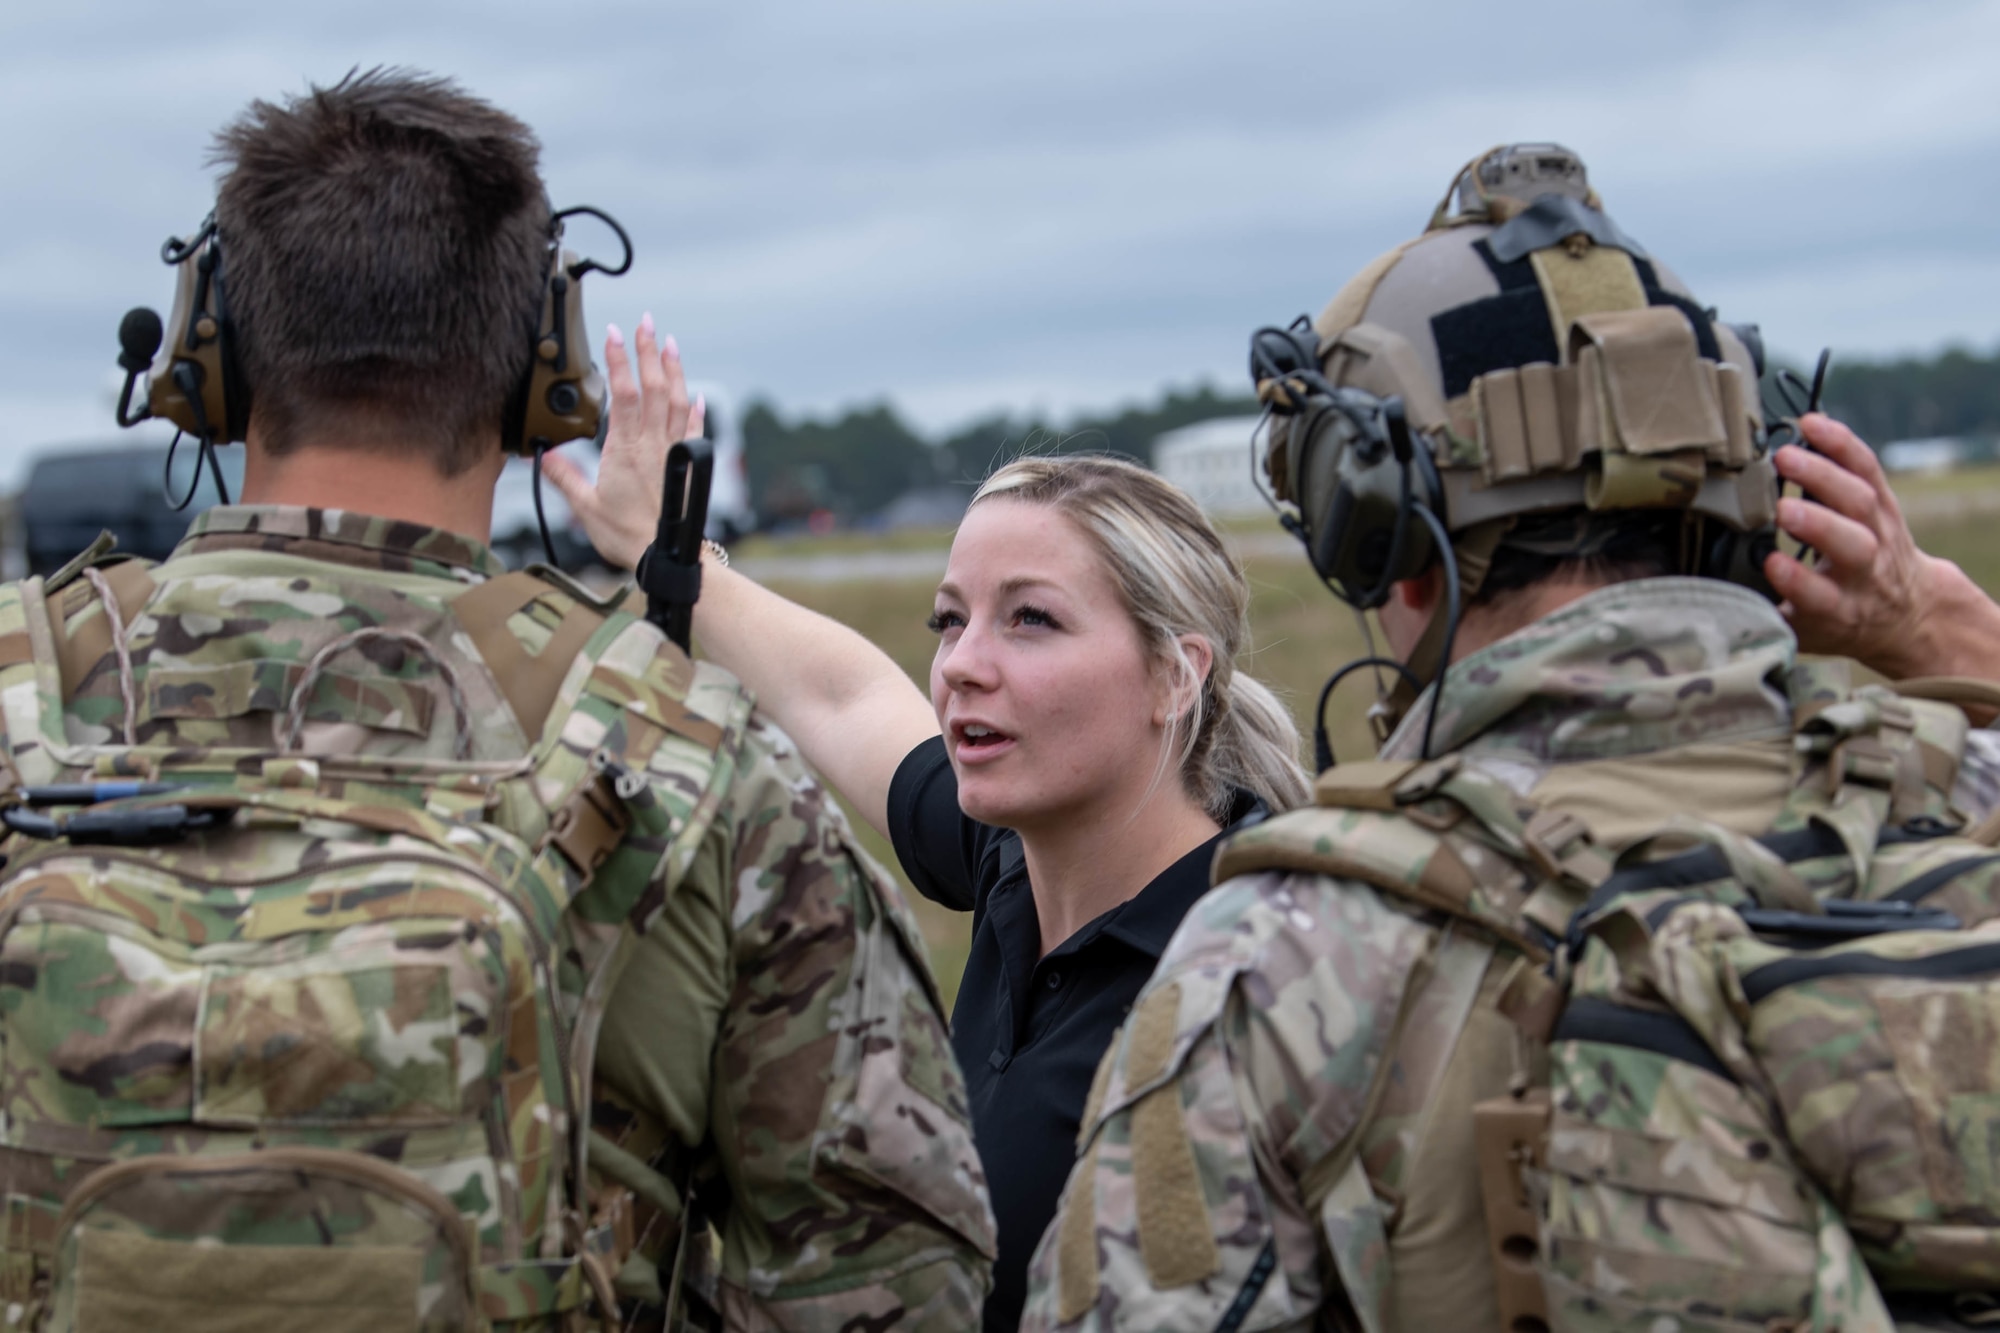 A blond woman in a black t-shirt can be seen talking to a pair of Special Tactics operators as we look between them over their shoulders at the woman gesturing toward the distance.